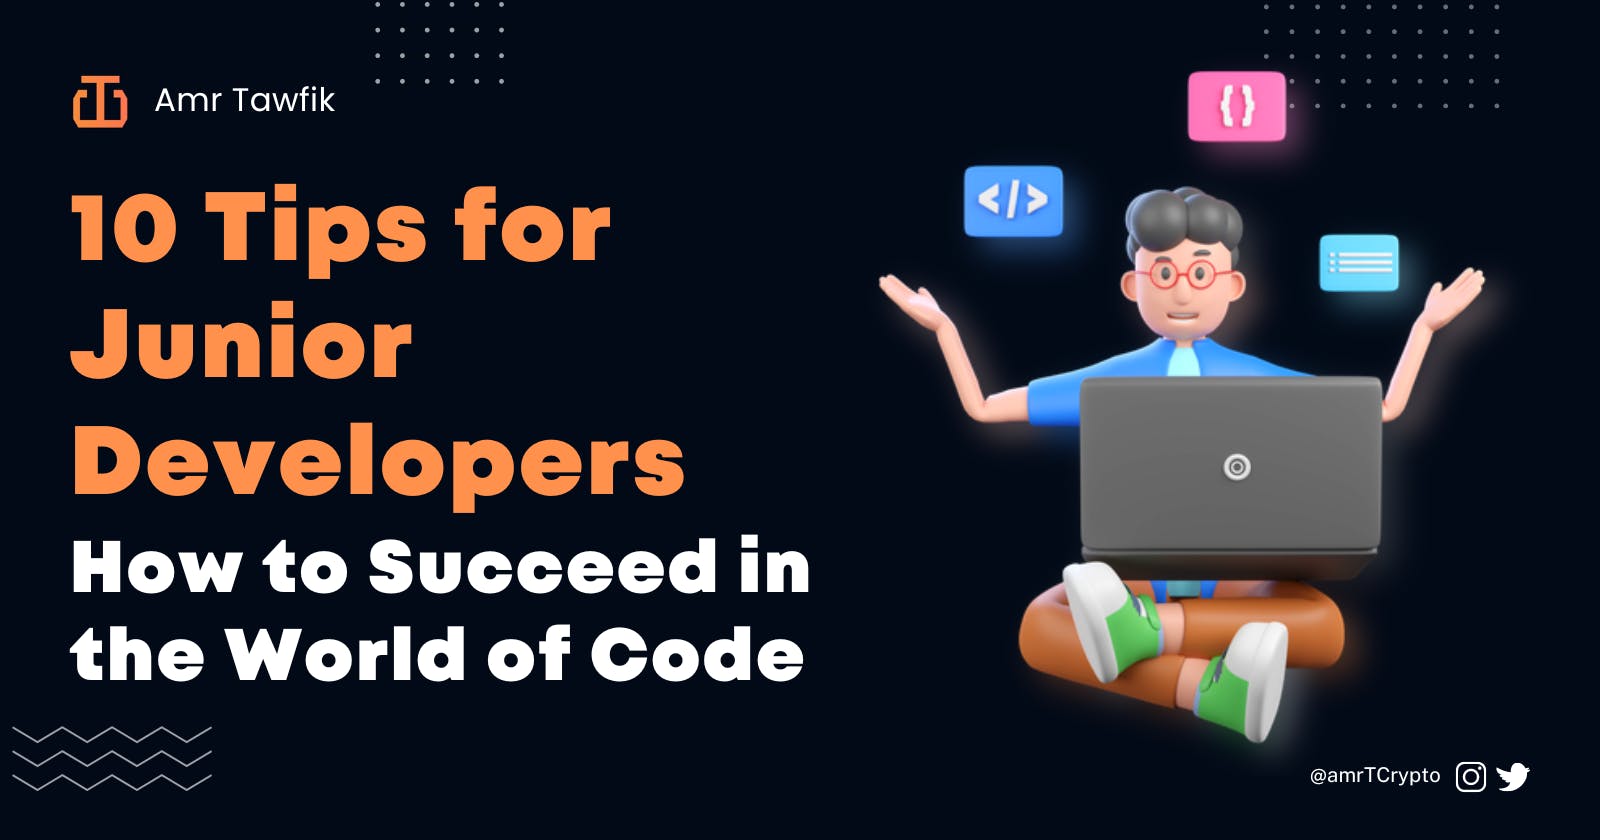 10 Tips for Junior Developers: How to Succeed in the World of Code